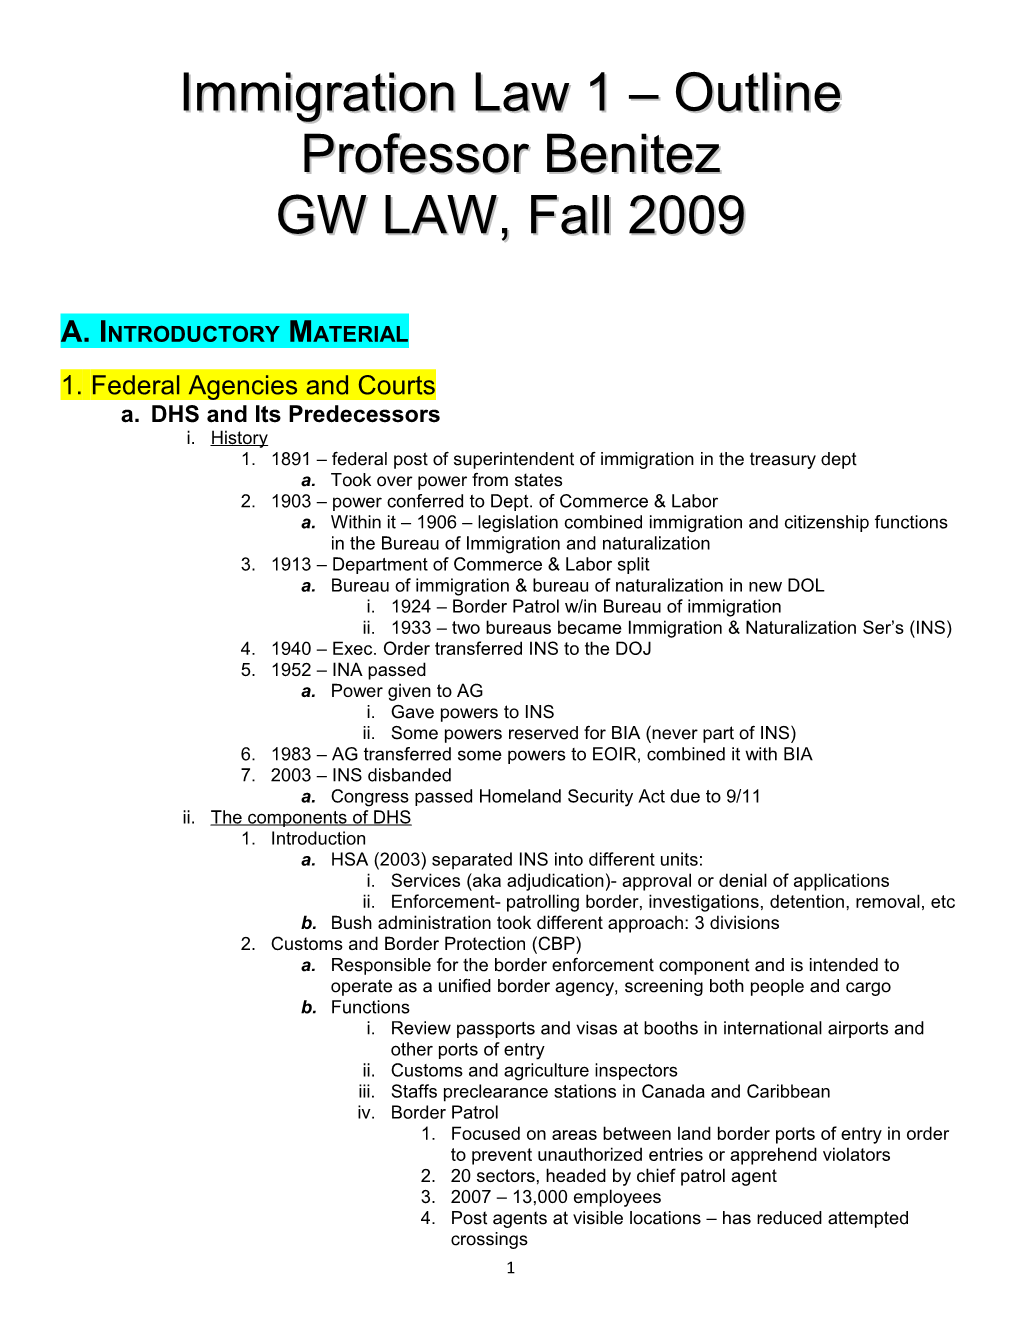 Immigration Law1 Outline